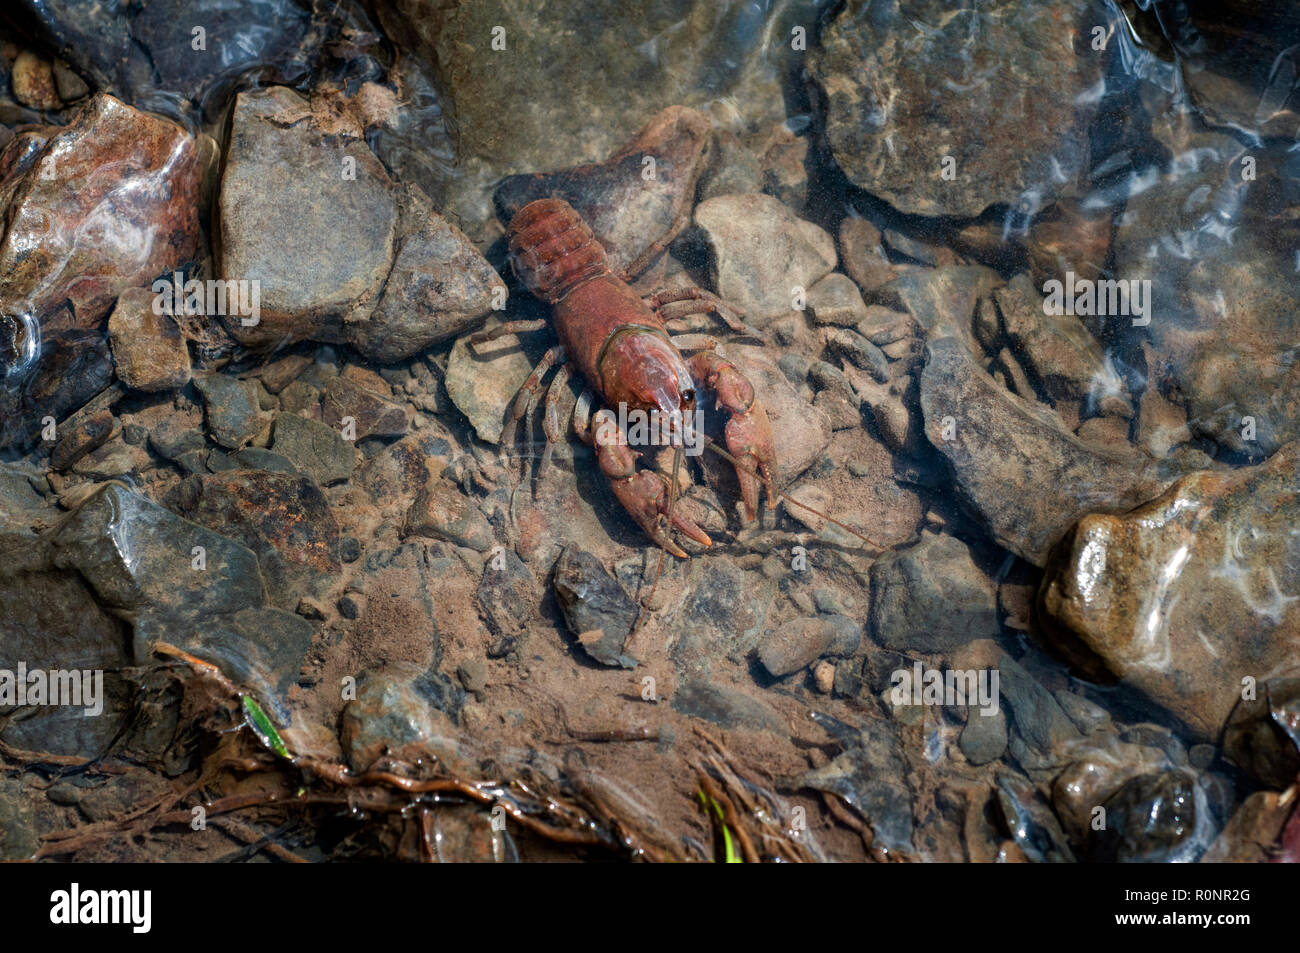 Crayfish in shallow water in a pond Stock Photo